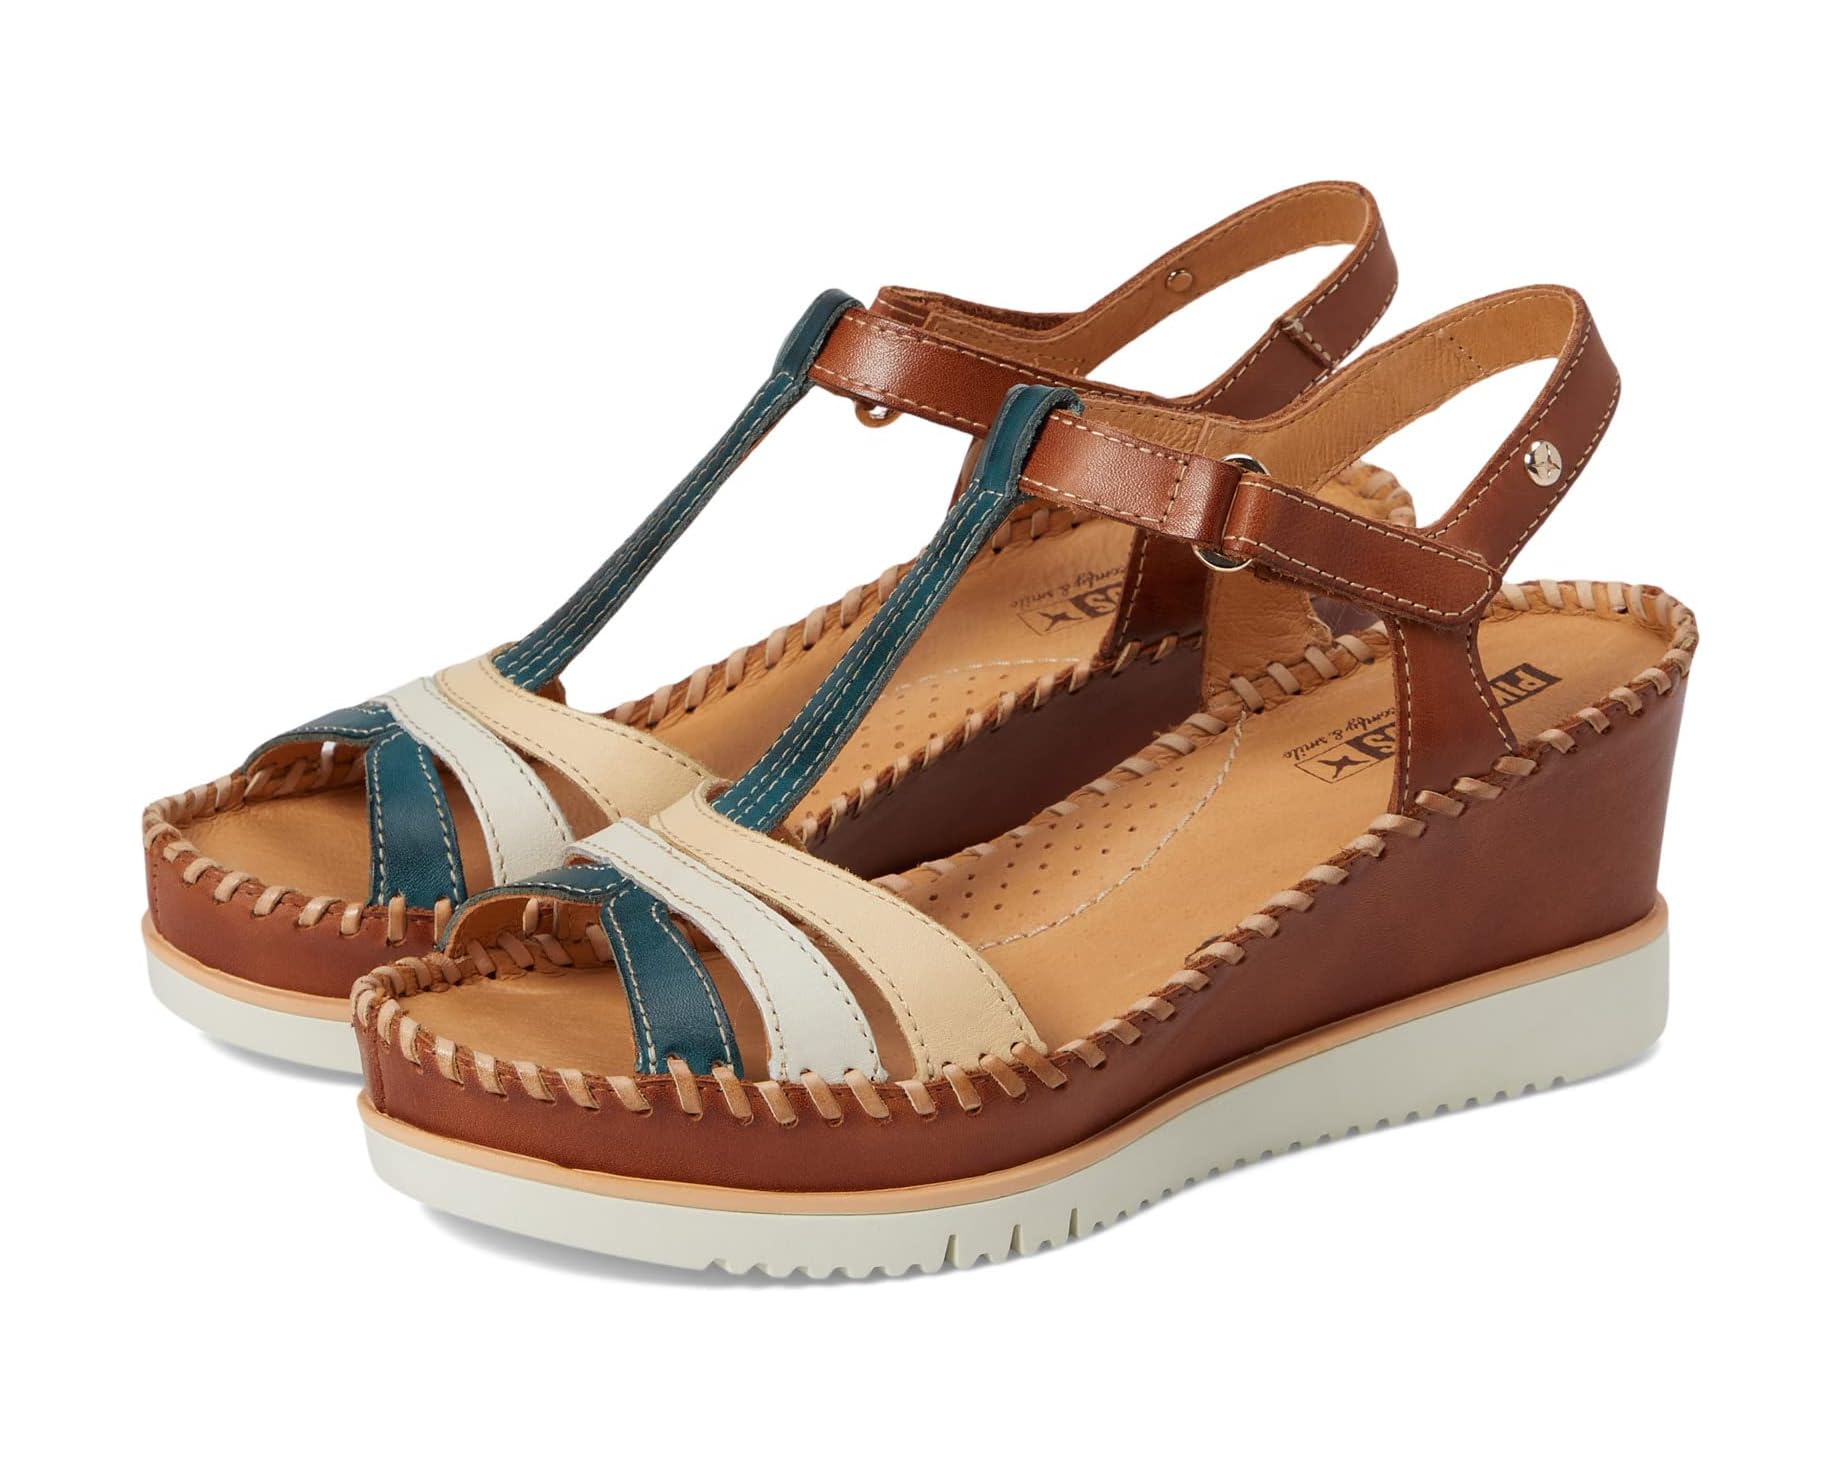 Pikolinos Aguadulce Wedge Sandals Women's 1